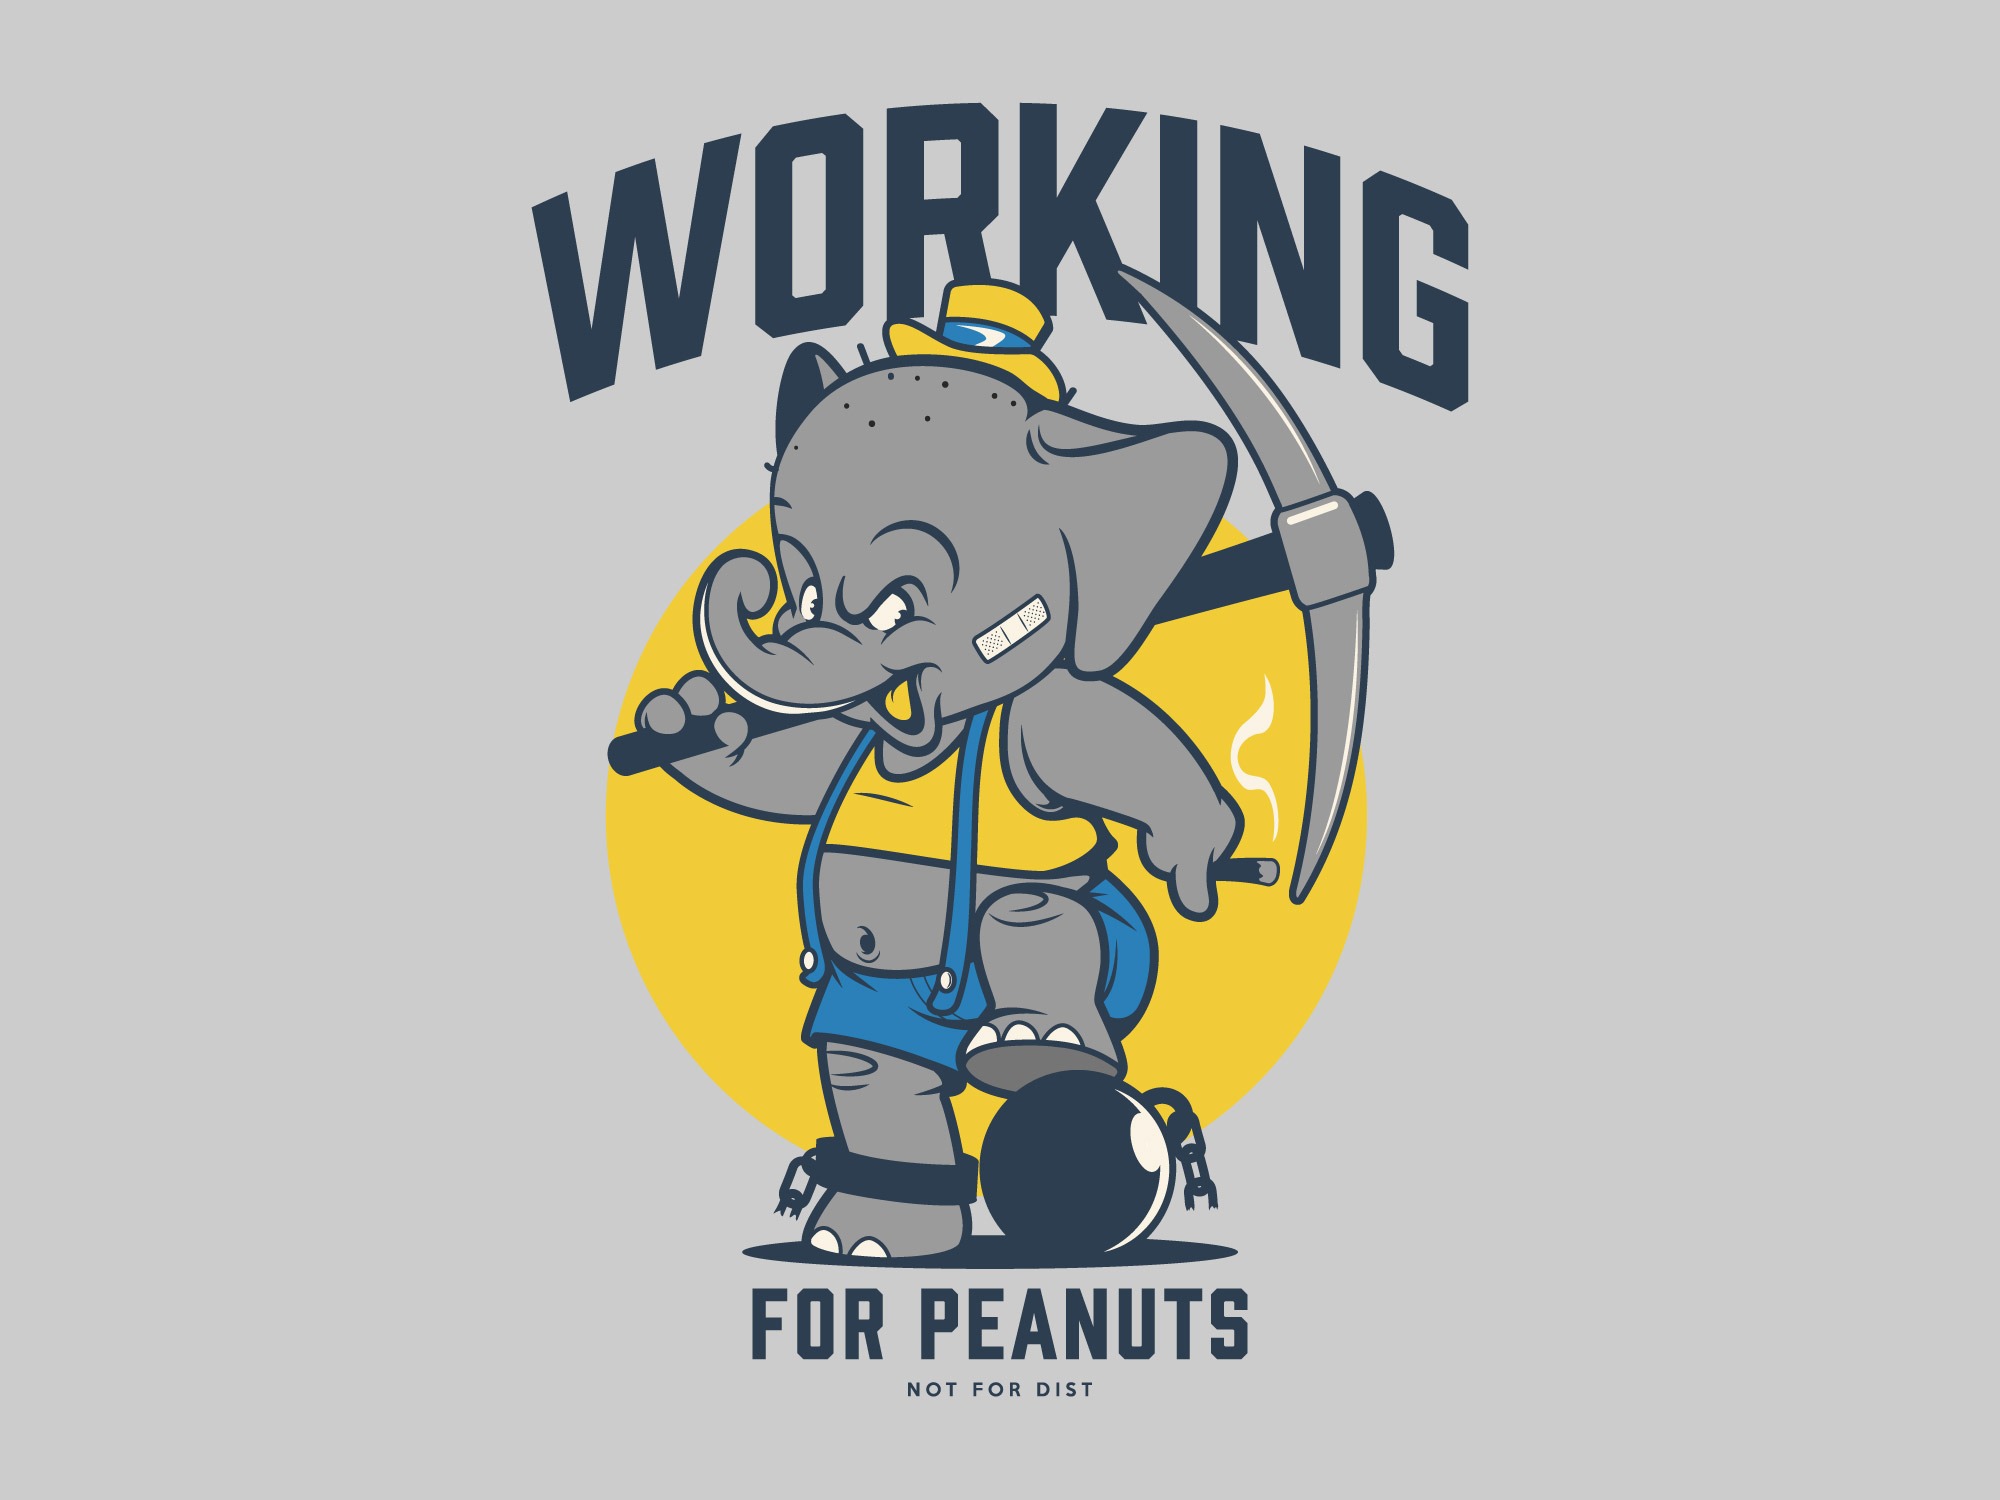 Working for peanuts